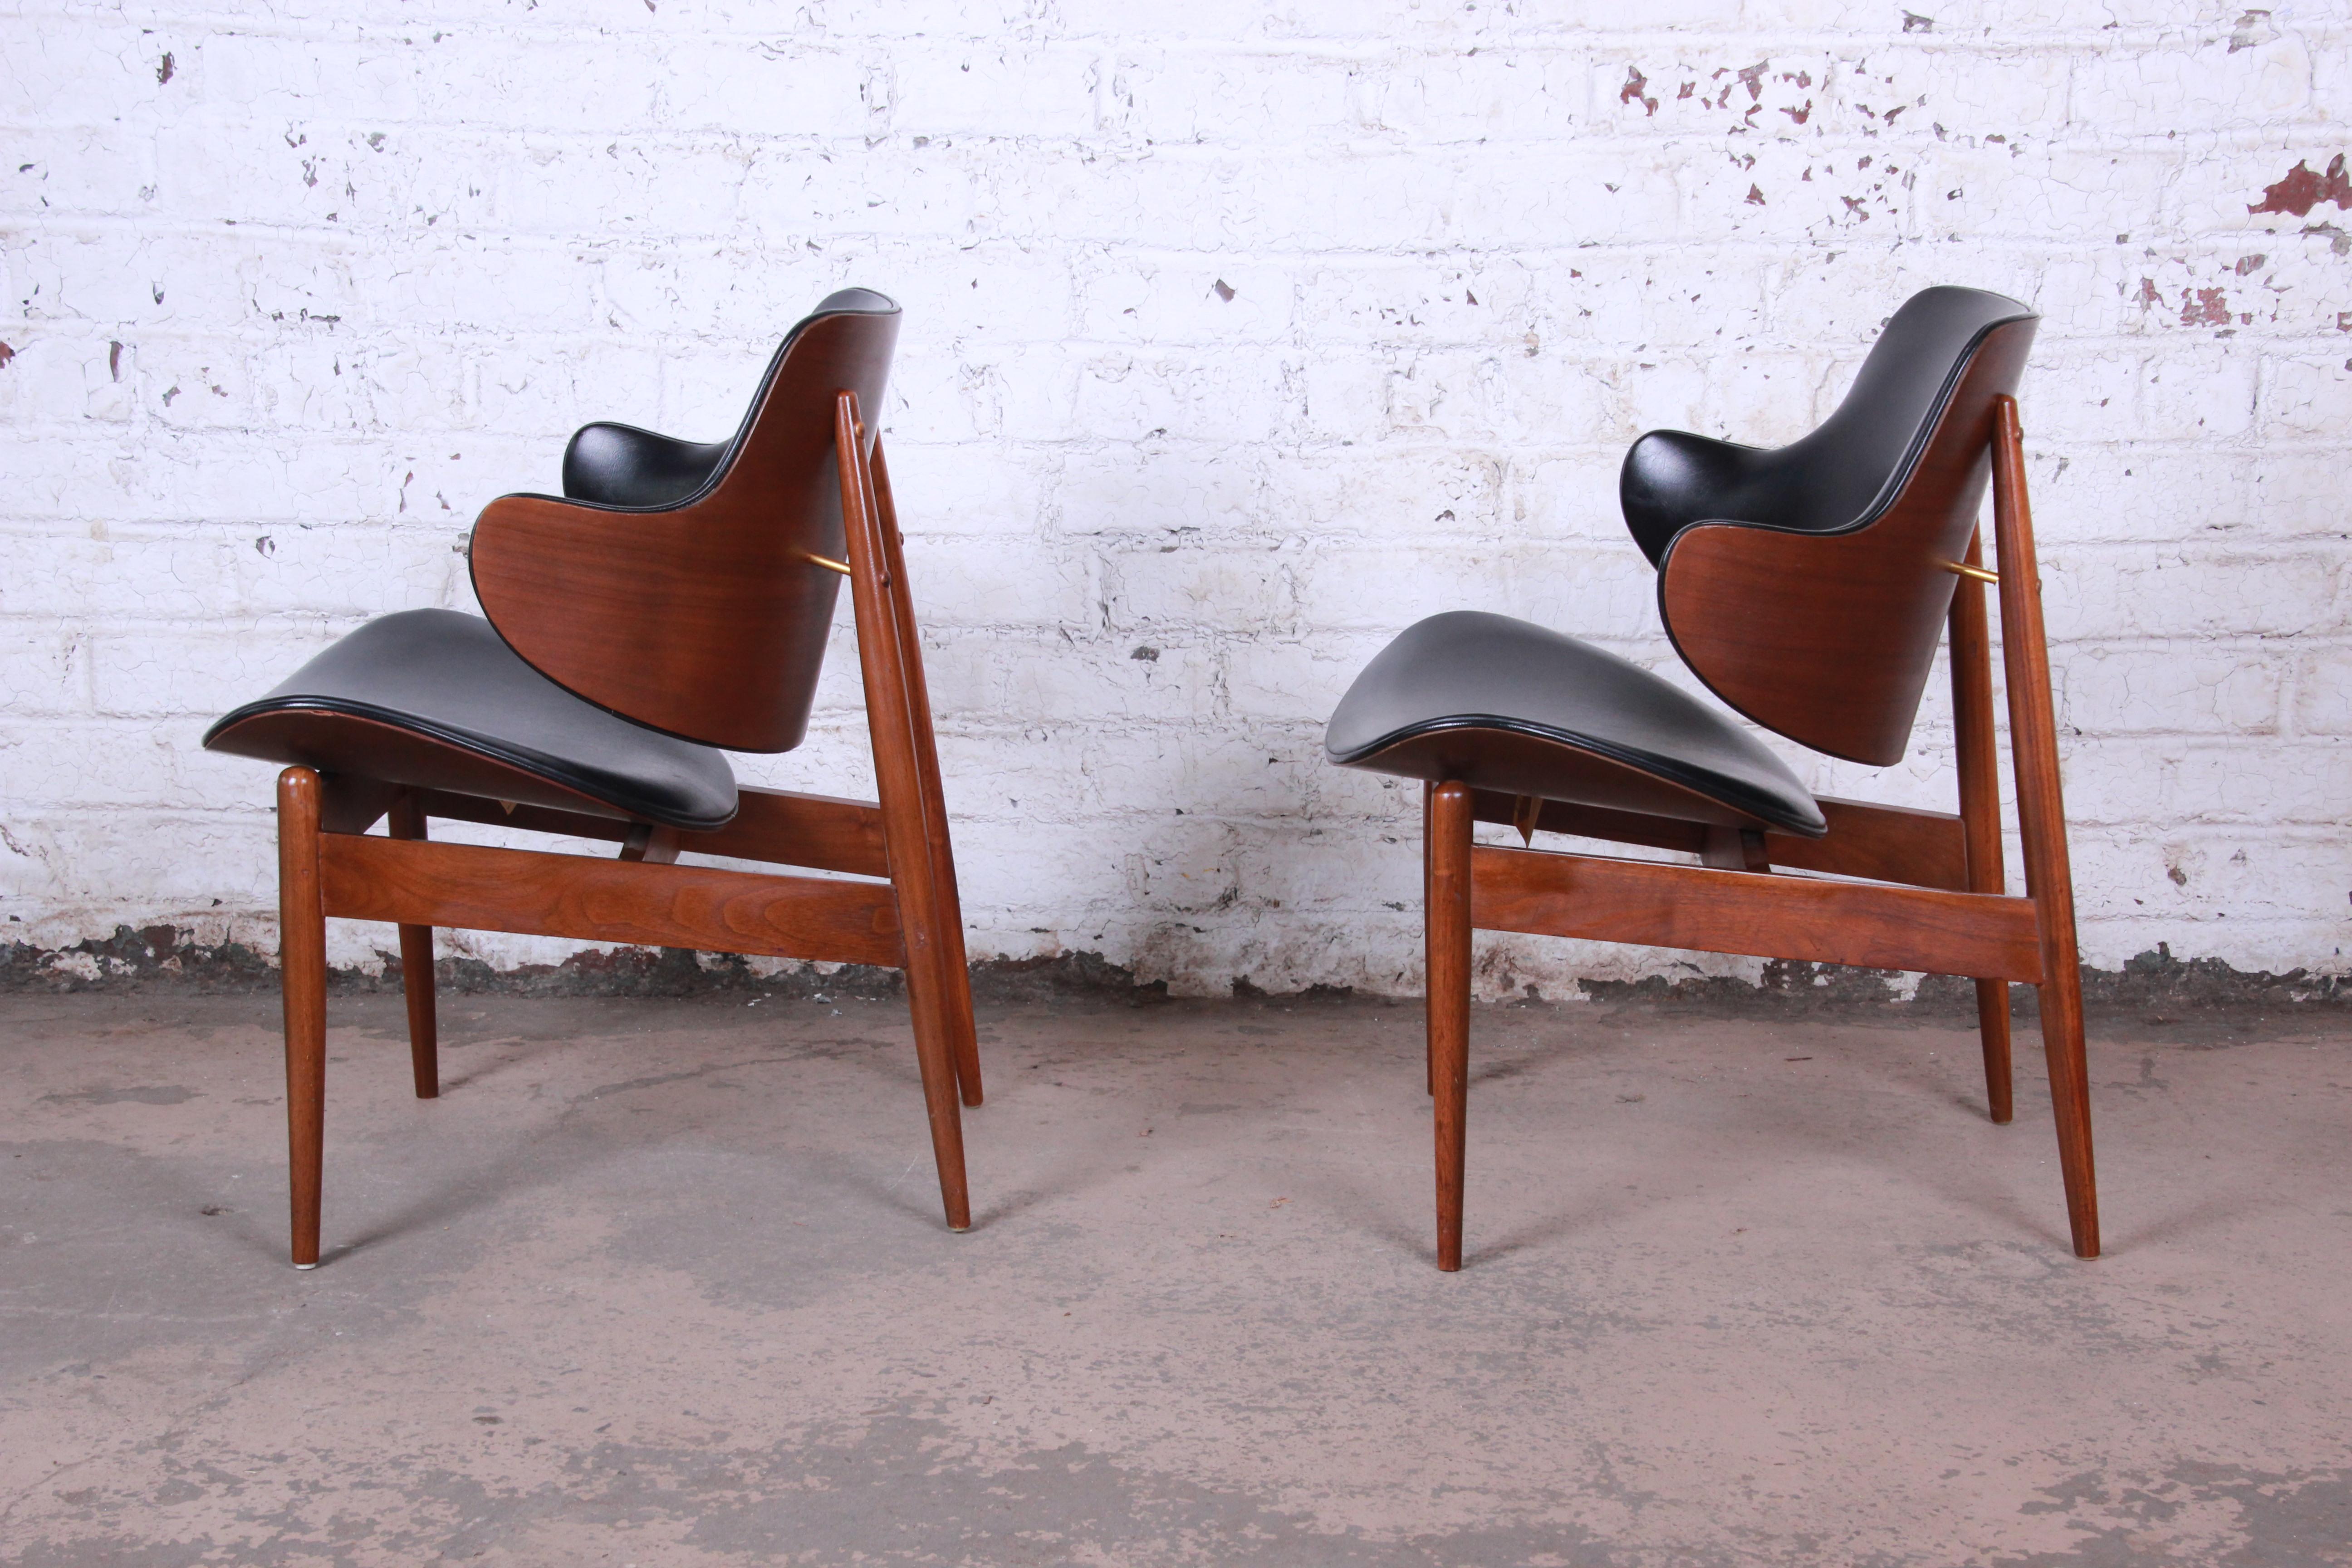 American Mid-Century Modern Clam Shell Chairs by Seymour J. Wiener for Kodawood, 1960s